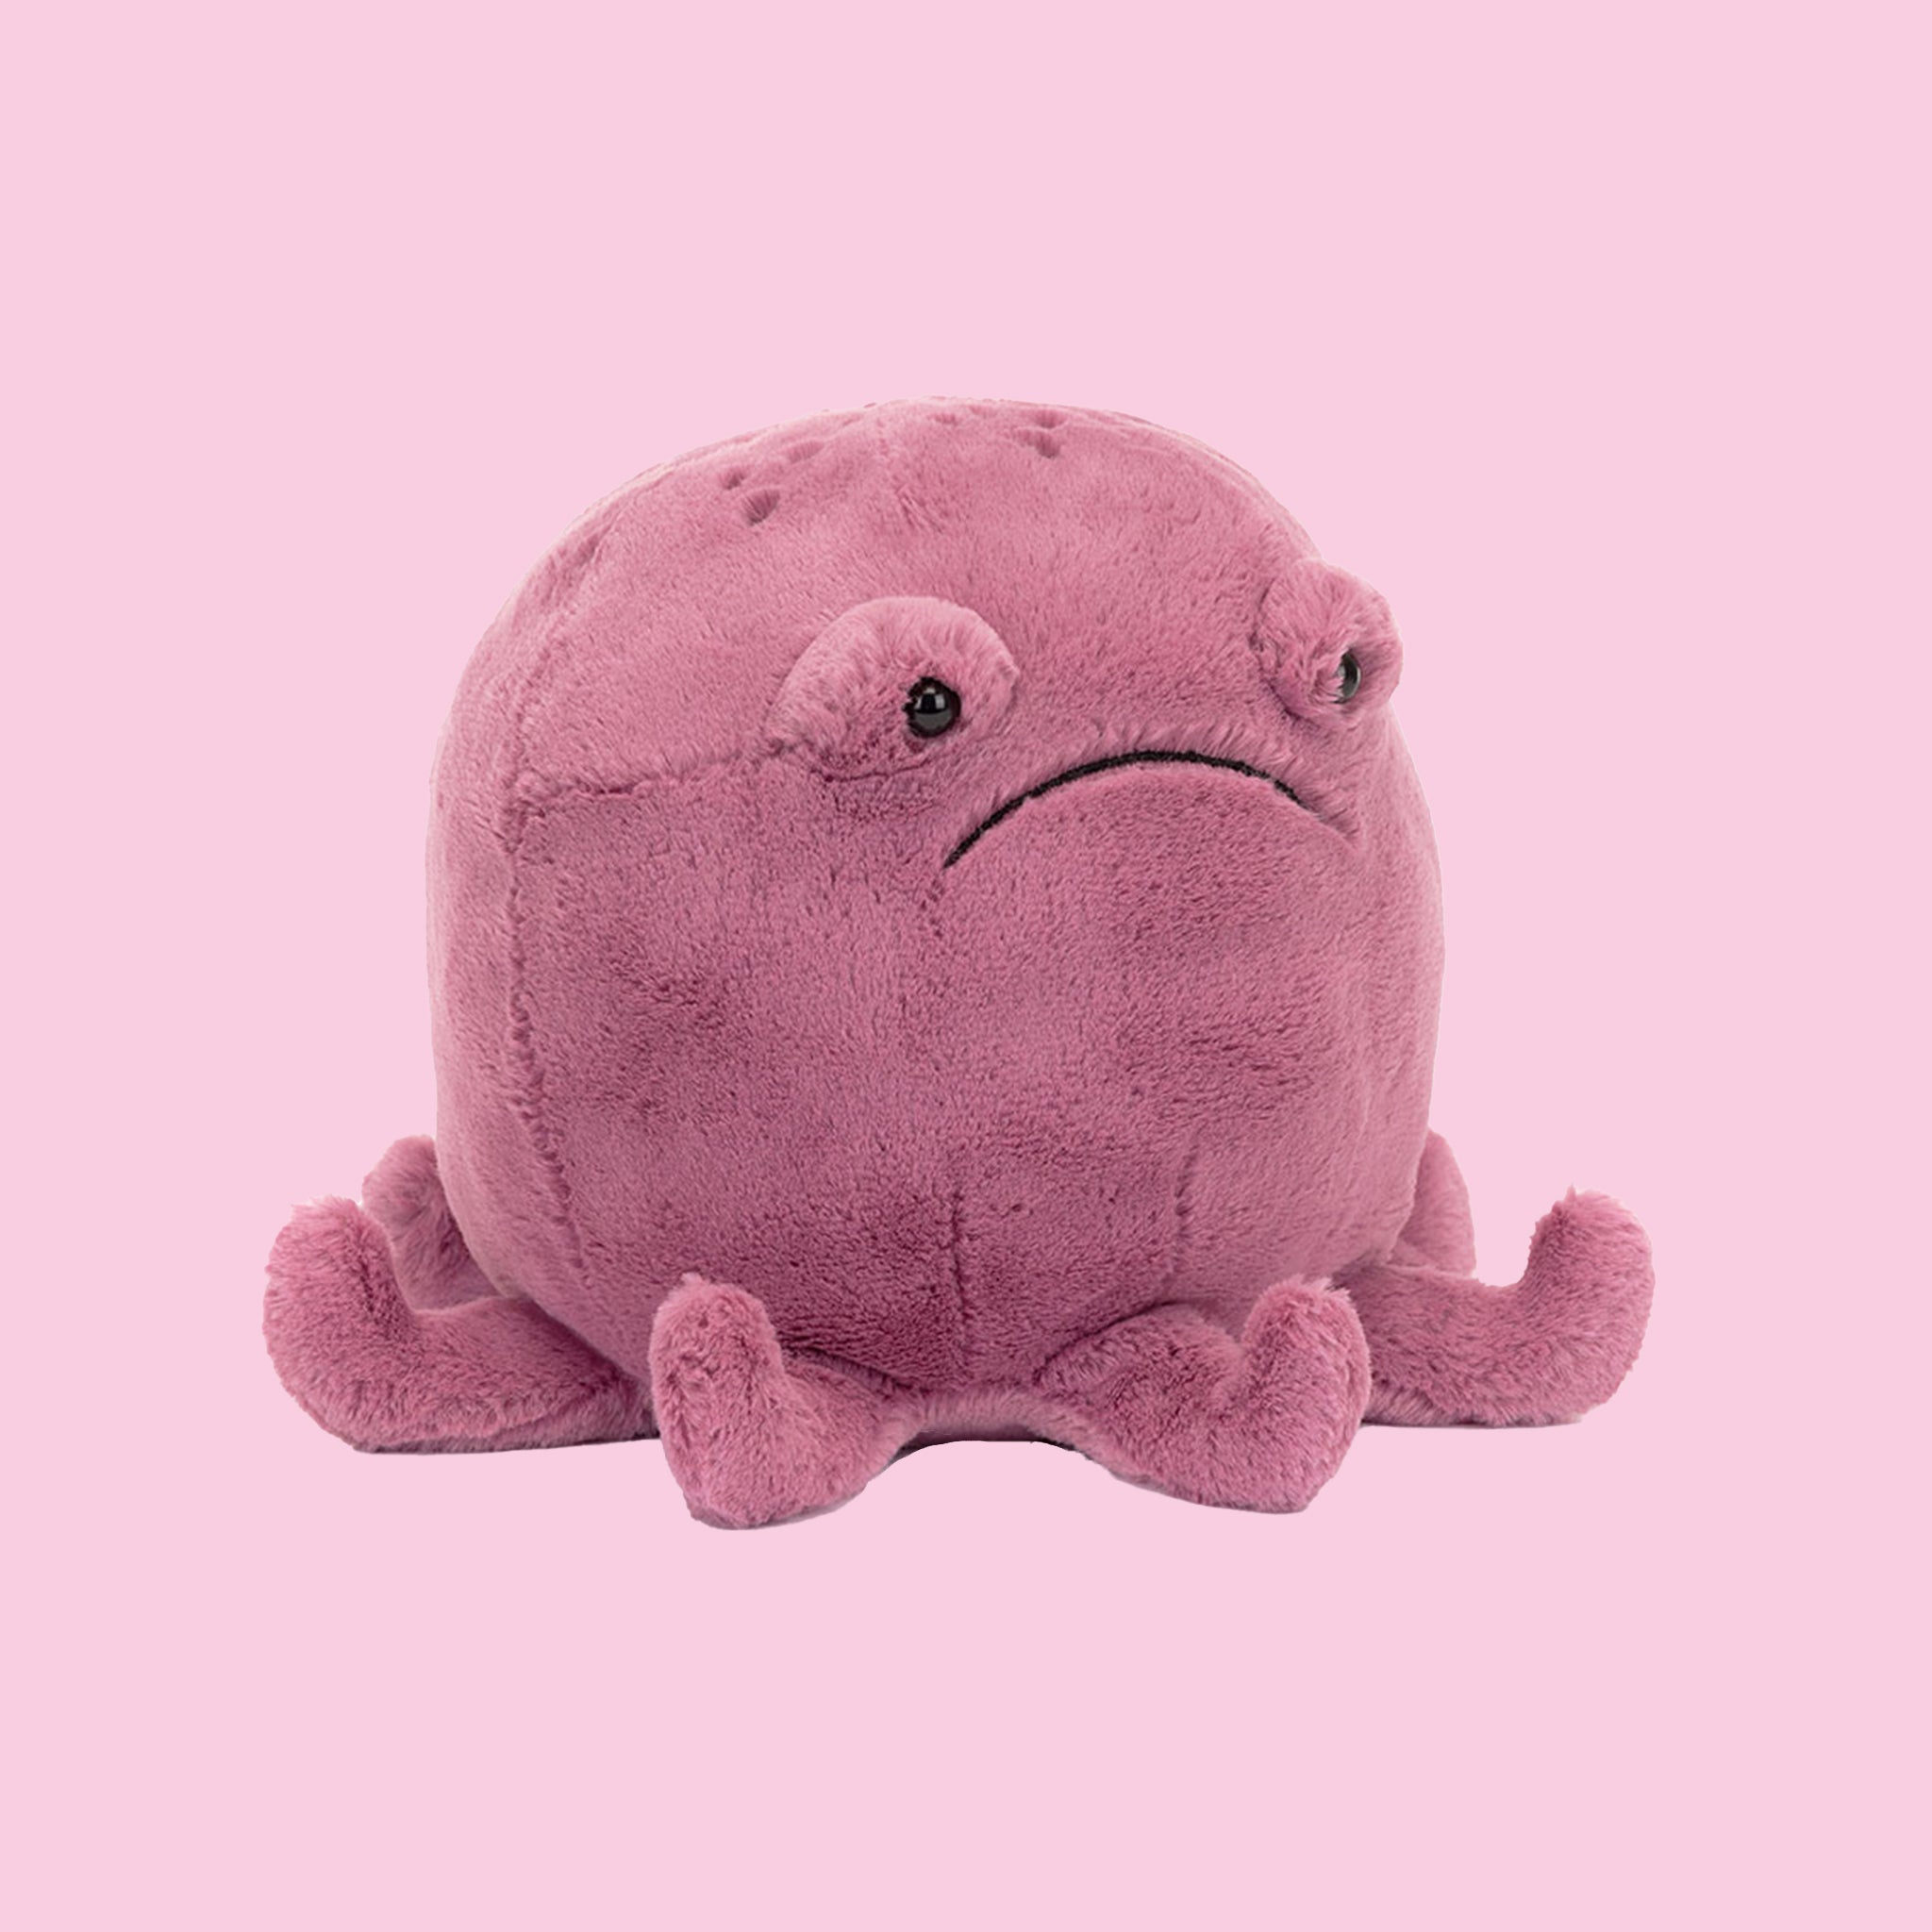 A magenta octopus shaped stuffed animal toy. 